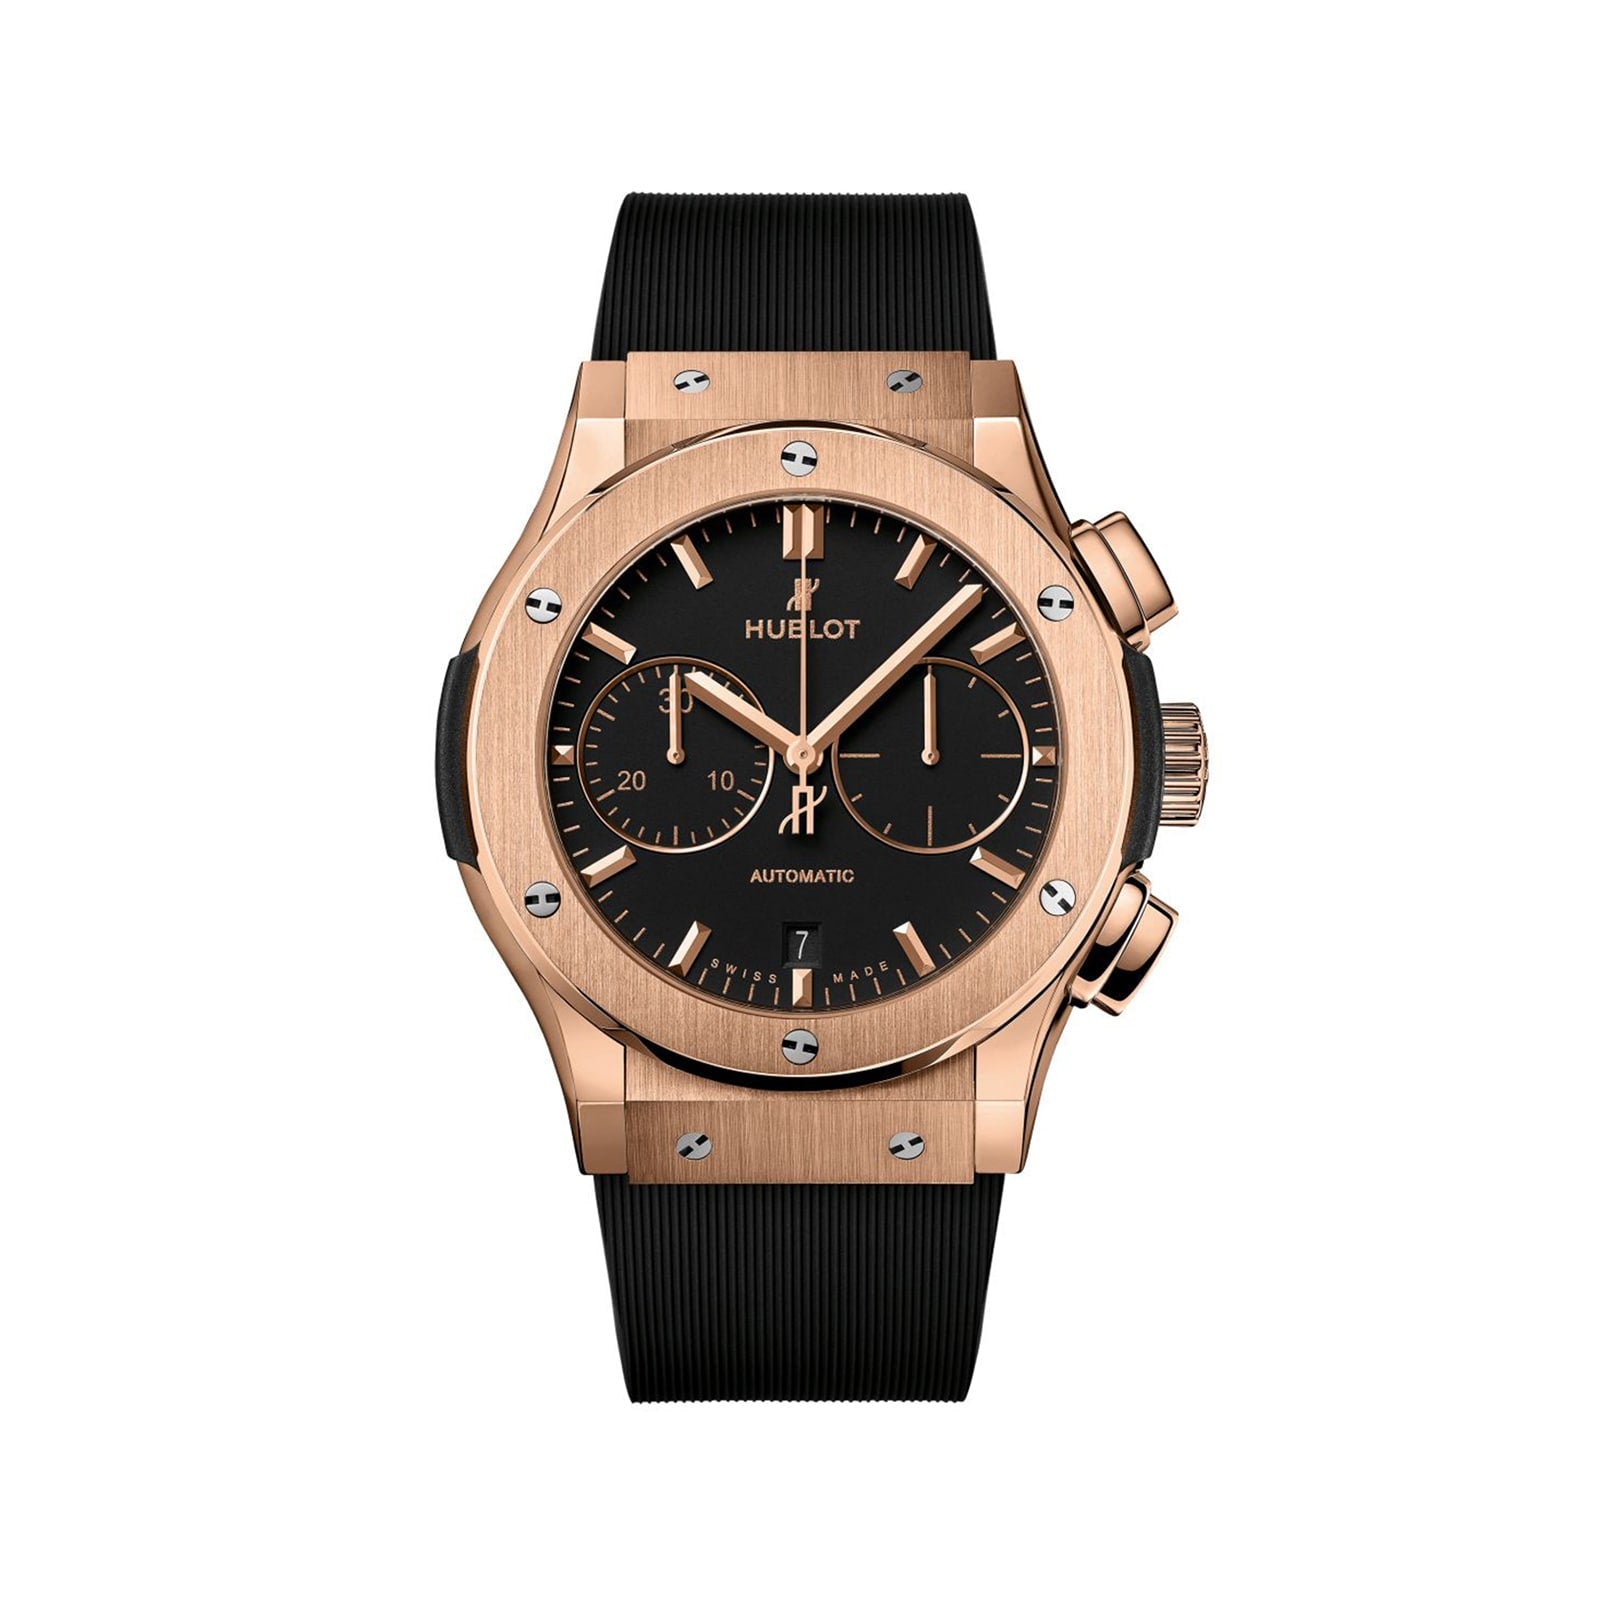 Classic Fusion Chronograph Ceramic King Gold 45mm Mens Watch